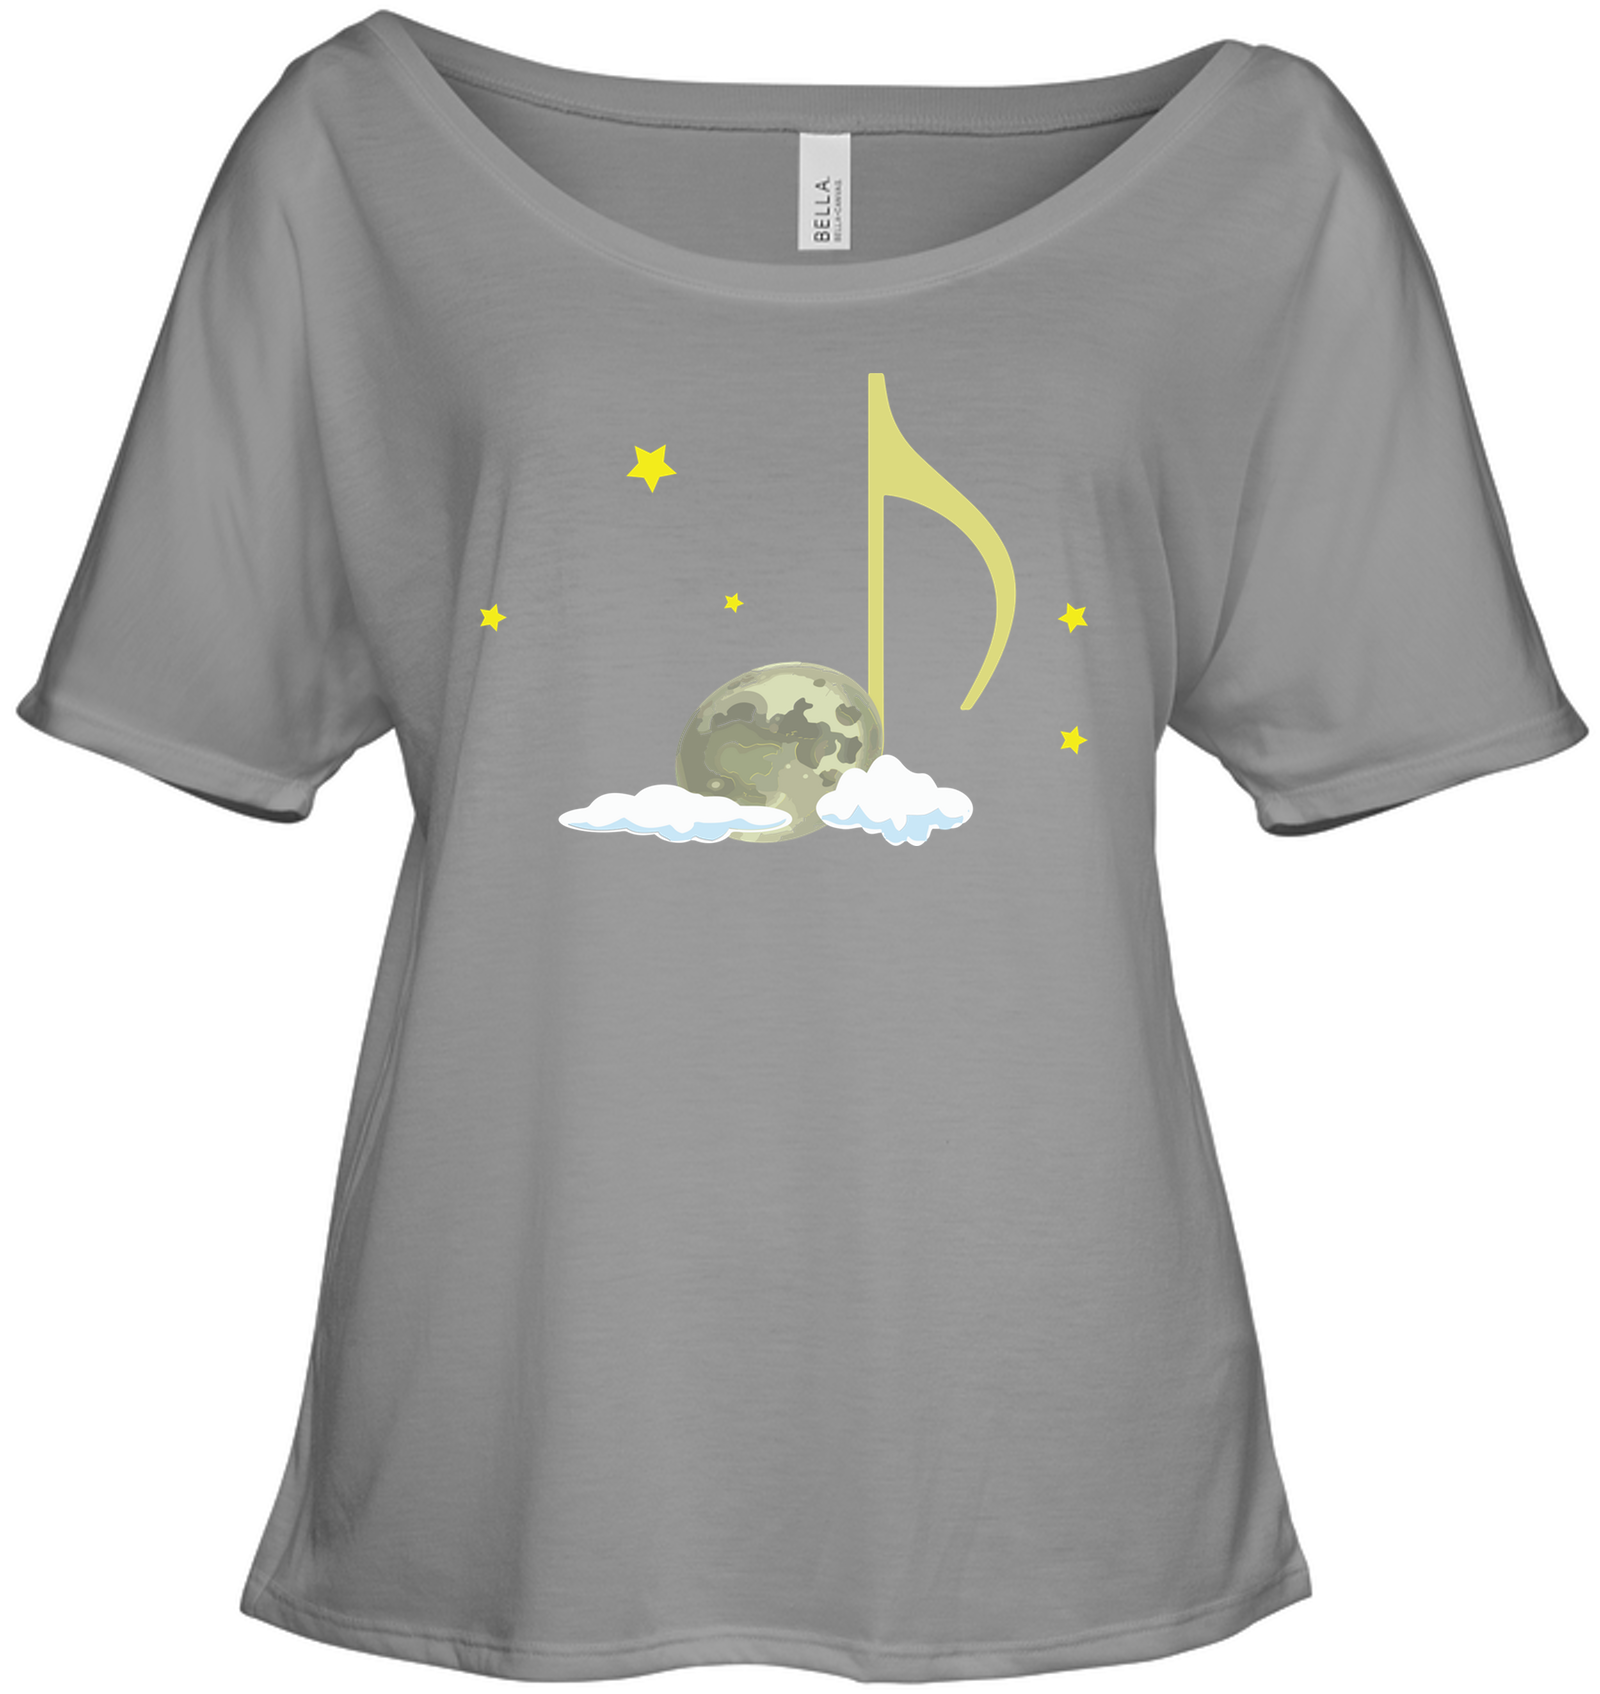 Night Note and stars - Bella + Canvas Women's Slouchy Tee